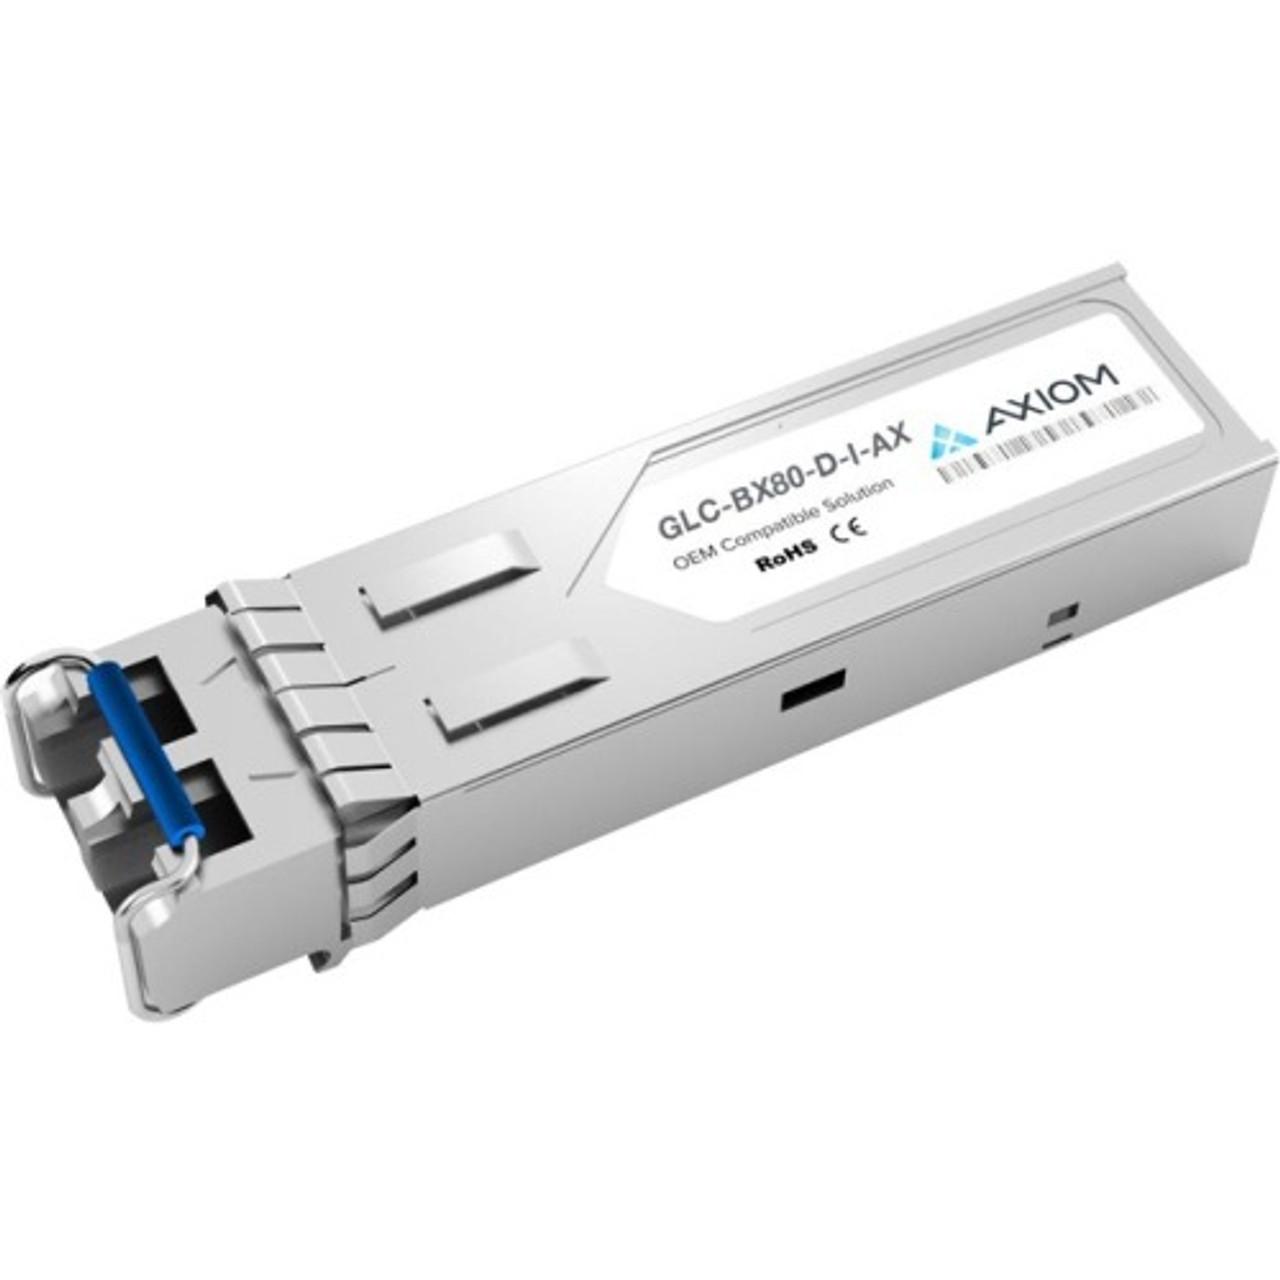 GLC-BX80-D-I-AX Axiom 1Gbps 1000Base-BX-D Single-mode Fiber 80km 1570nmTX/1490nmRX LC Connector SFP Transceiver Module with DOM for Cisco Compatible